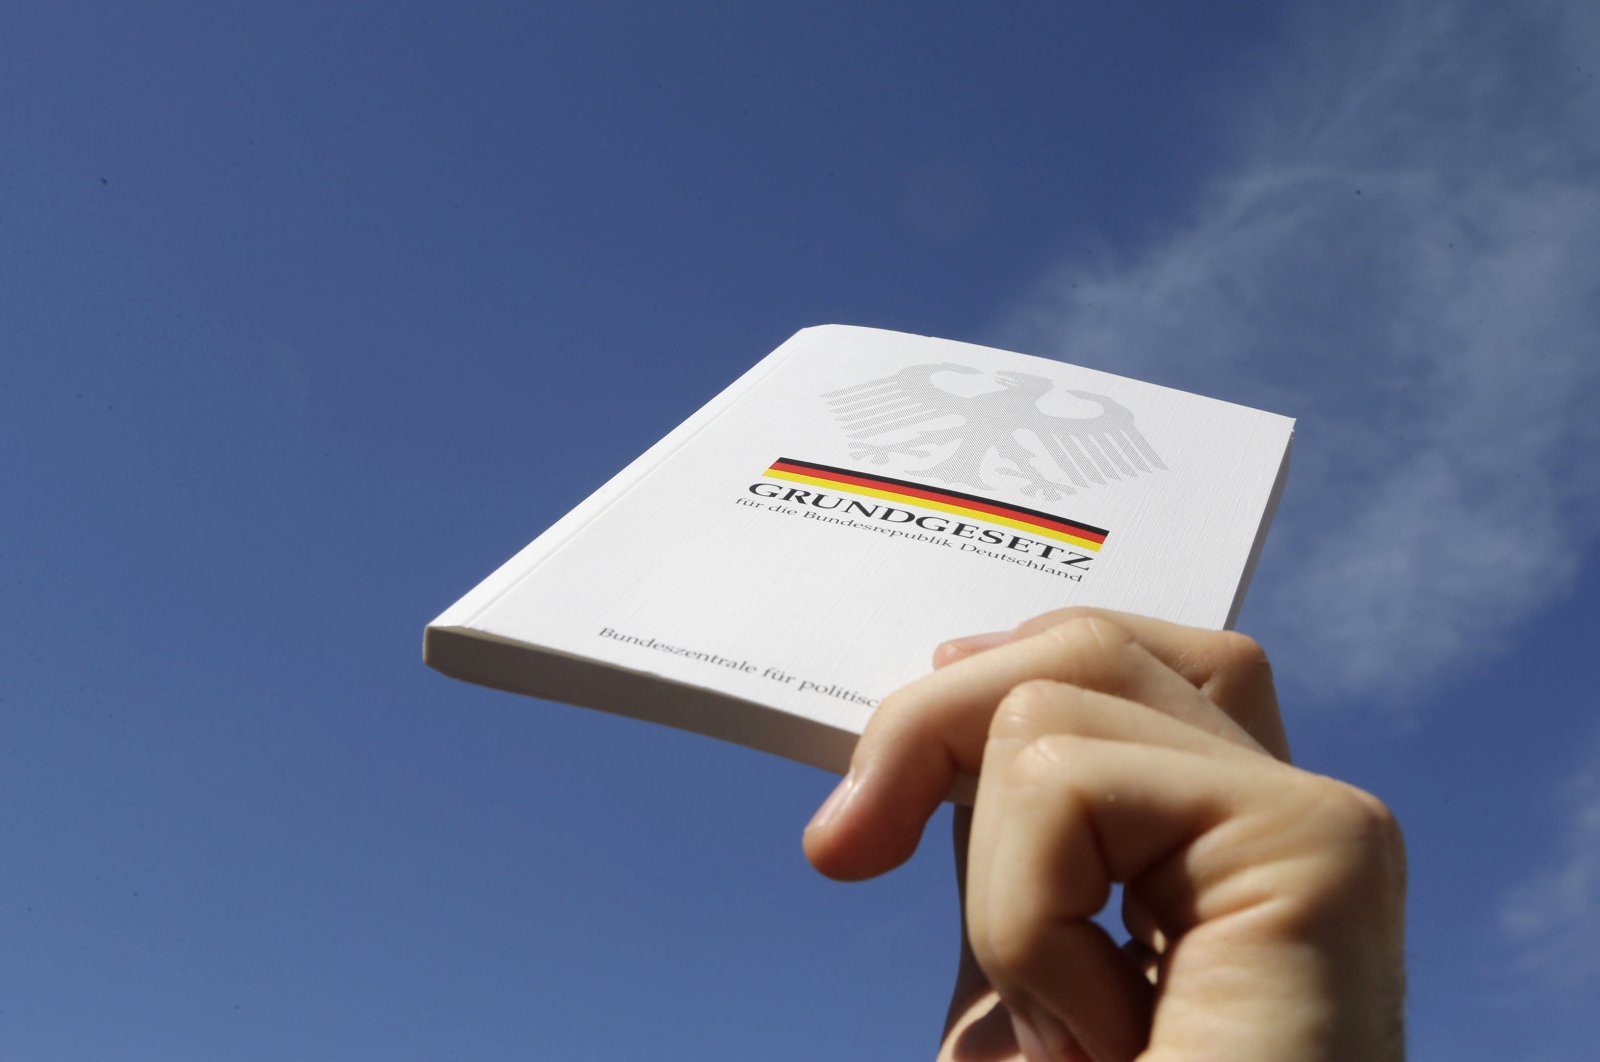 A demonstrator holds a copy of the German constitution "Grundgesetz" during a protest rally against internet surveillance in Berlin Sept. 7, 2013. (Reuters Photo)